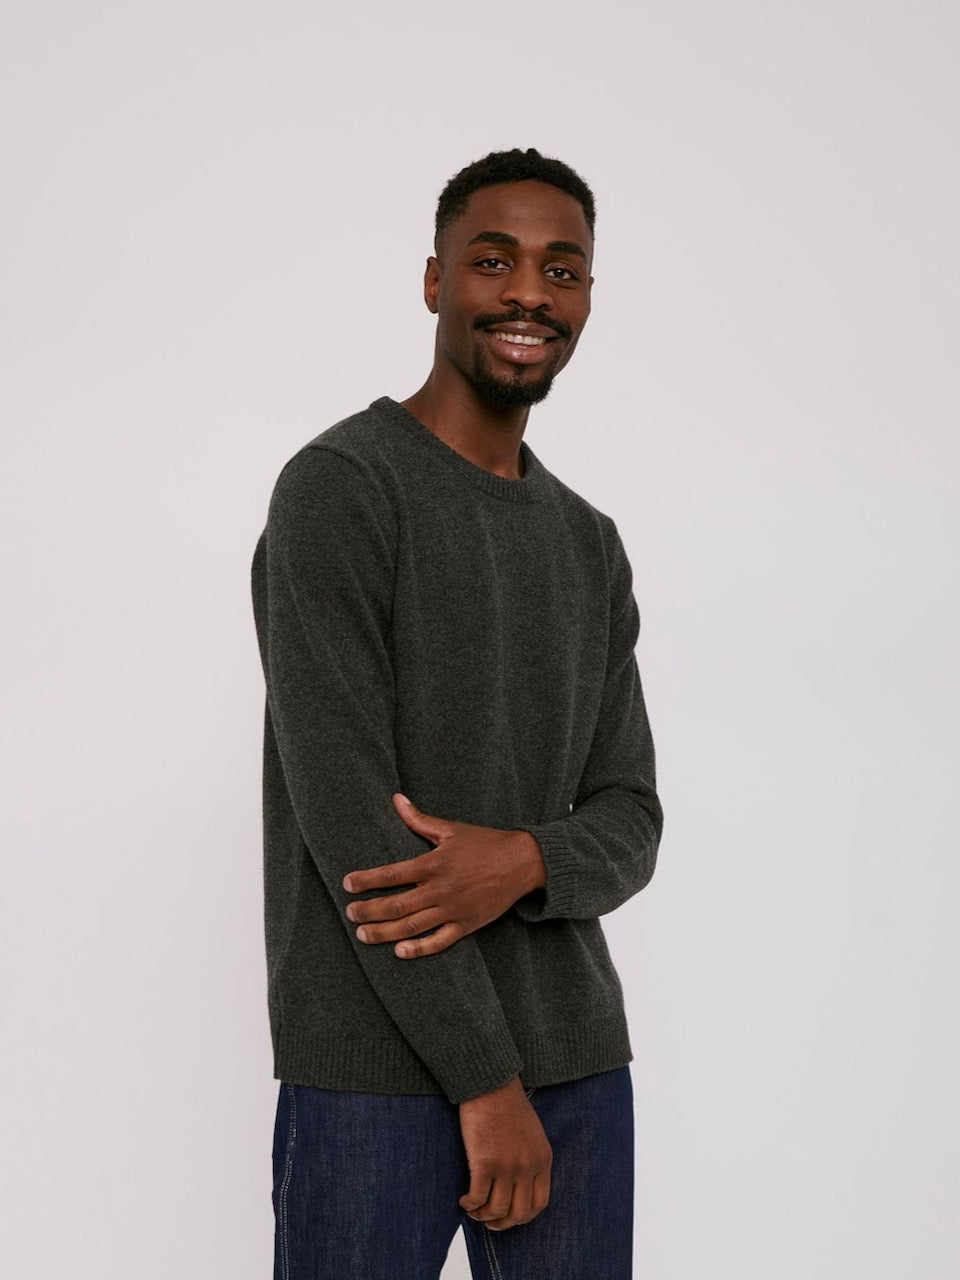 A man in a grey Recycled Wool Knit Jumper – Charcoal Melange from Organic Basics is posing for a photo.